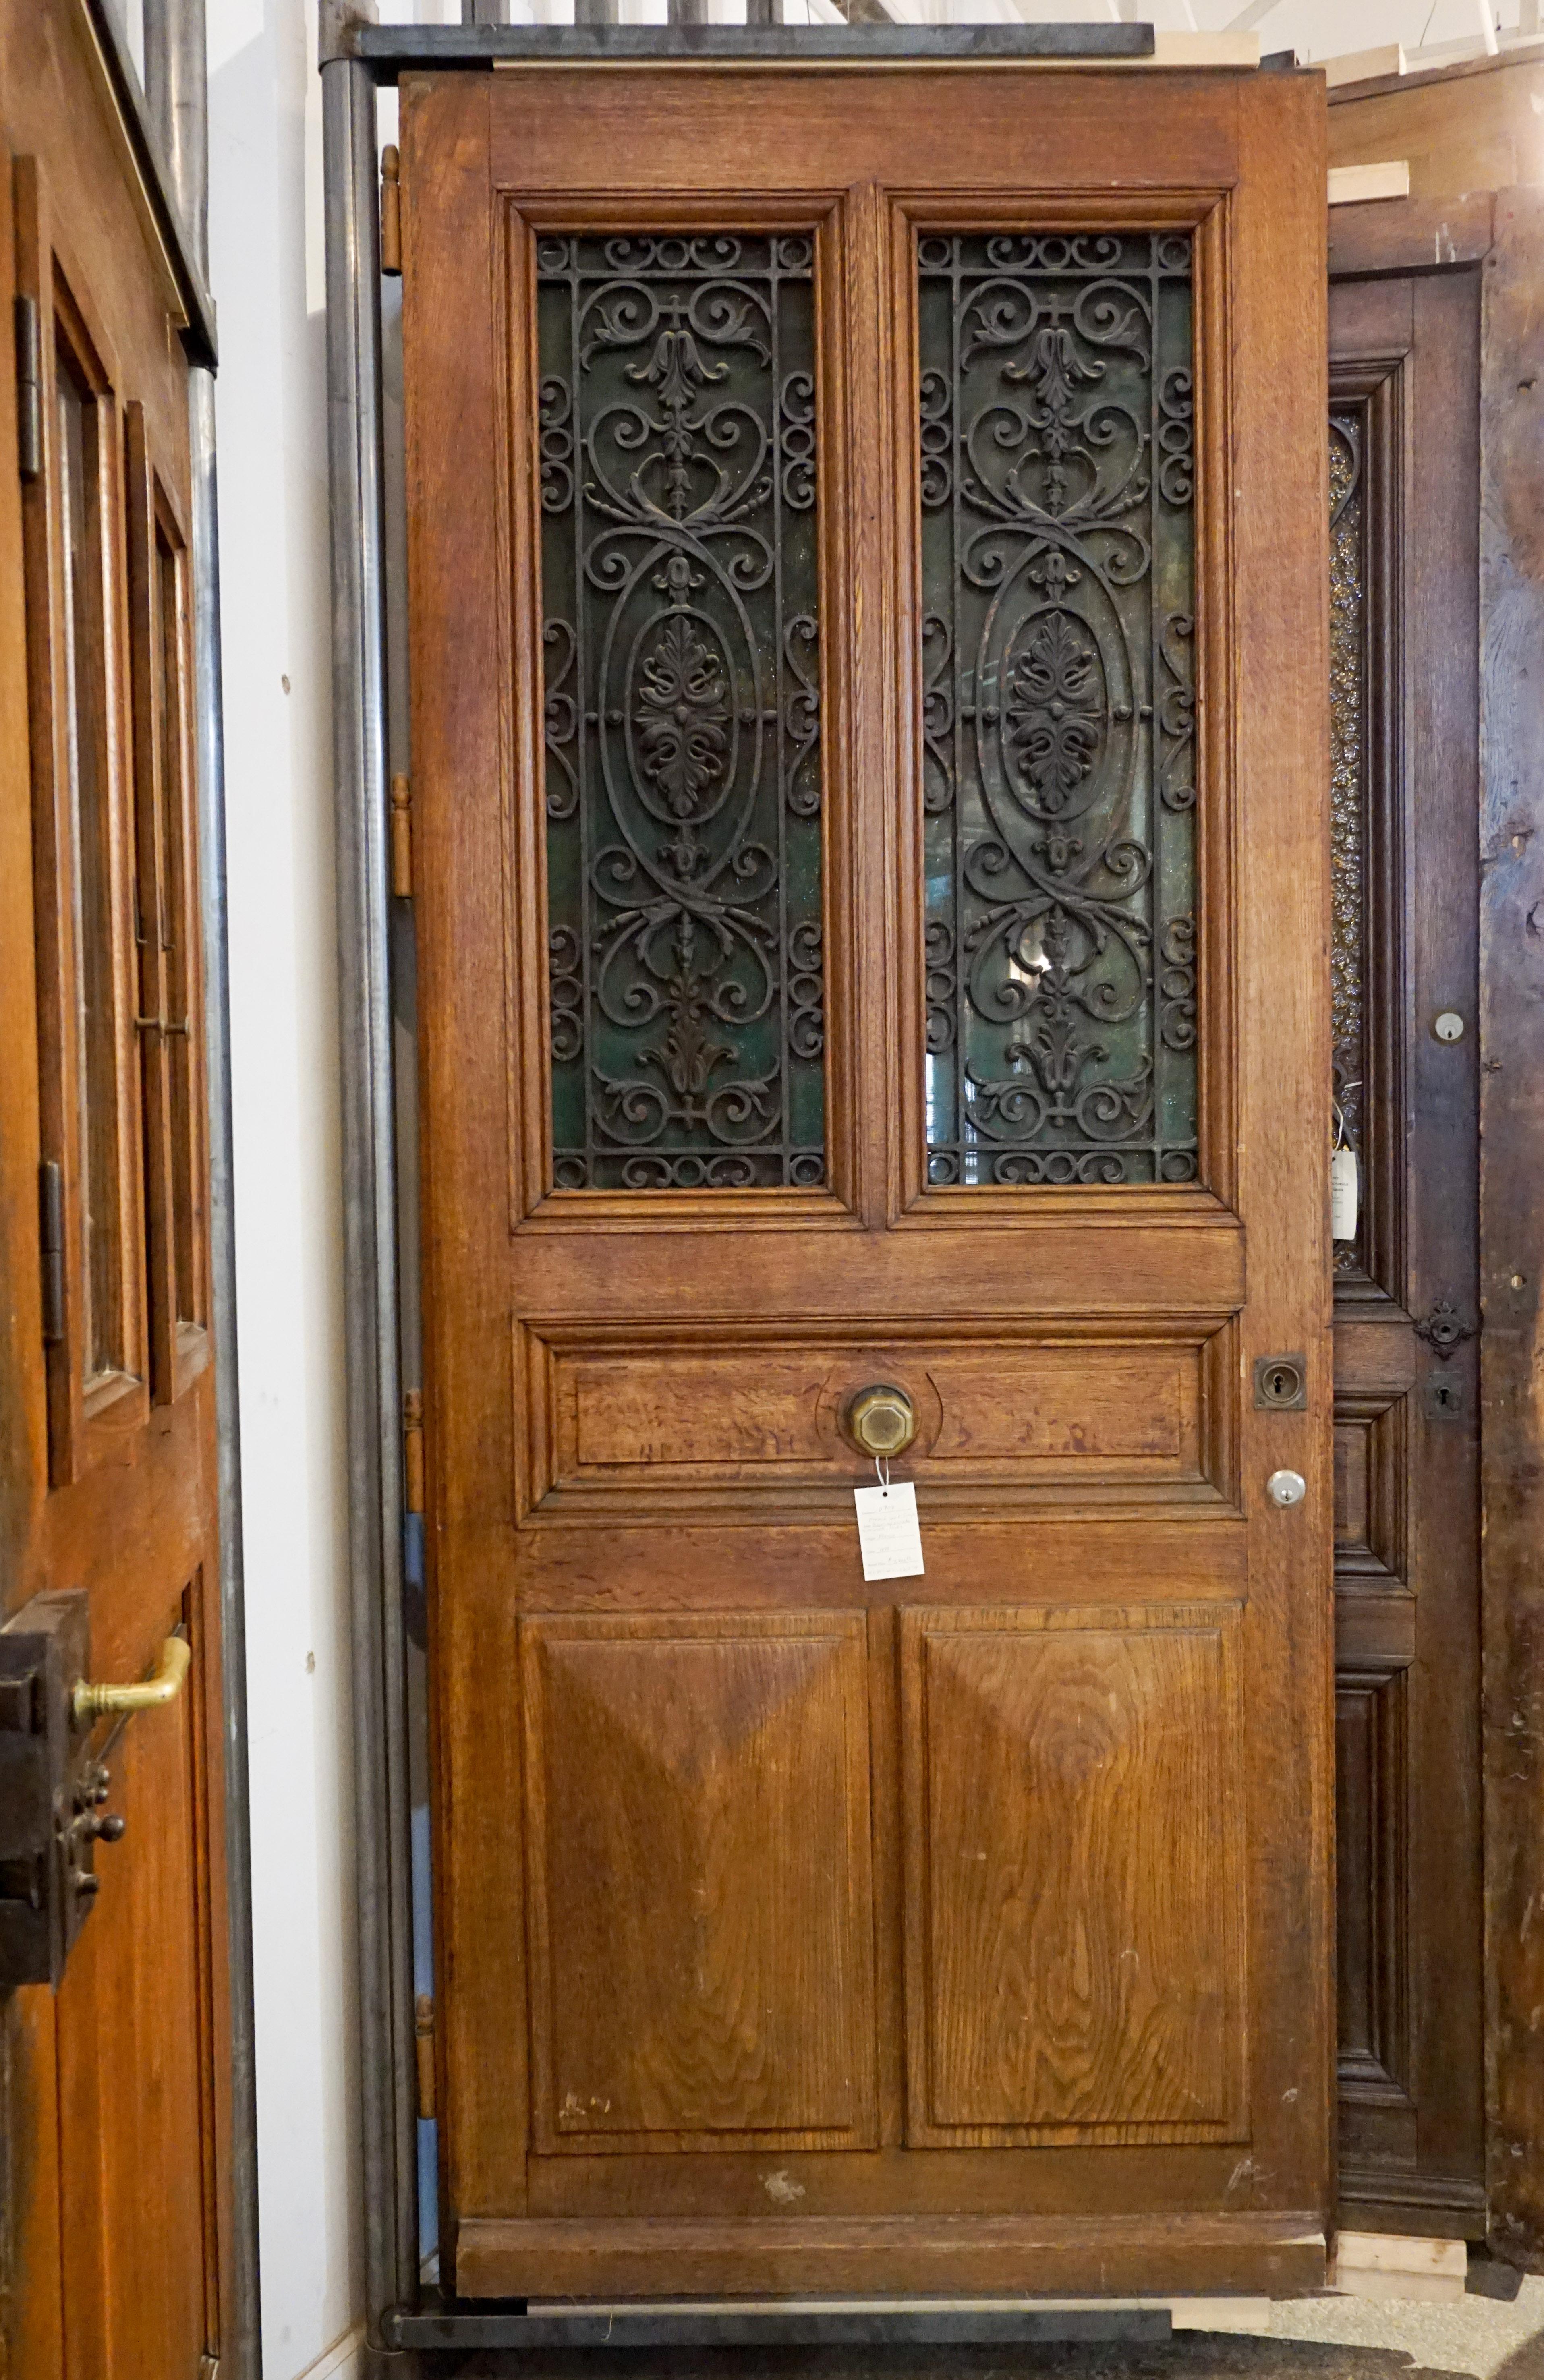 Here we have a beautiful antique oak entry door from France. Beautiful cast iron panels and center knob enhance this exquisite European door, circa 1880.

Measurements are: 41.25 x 102.5.